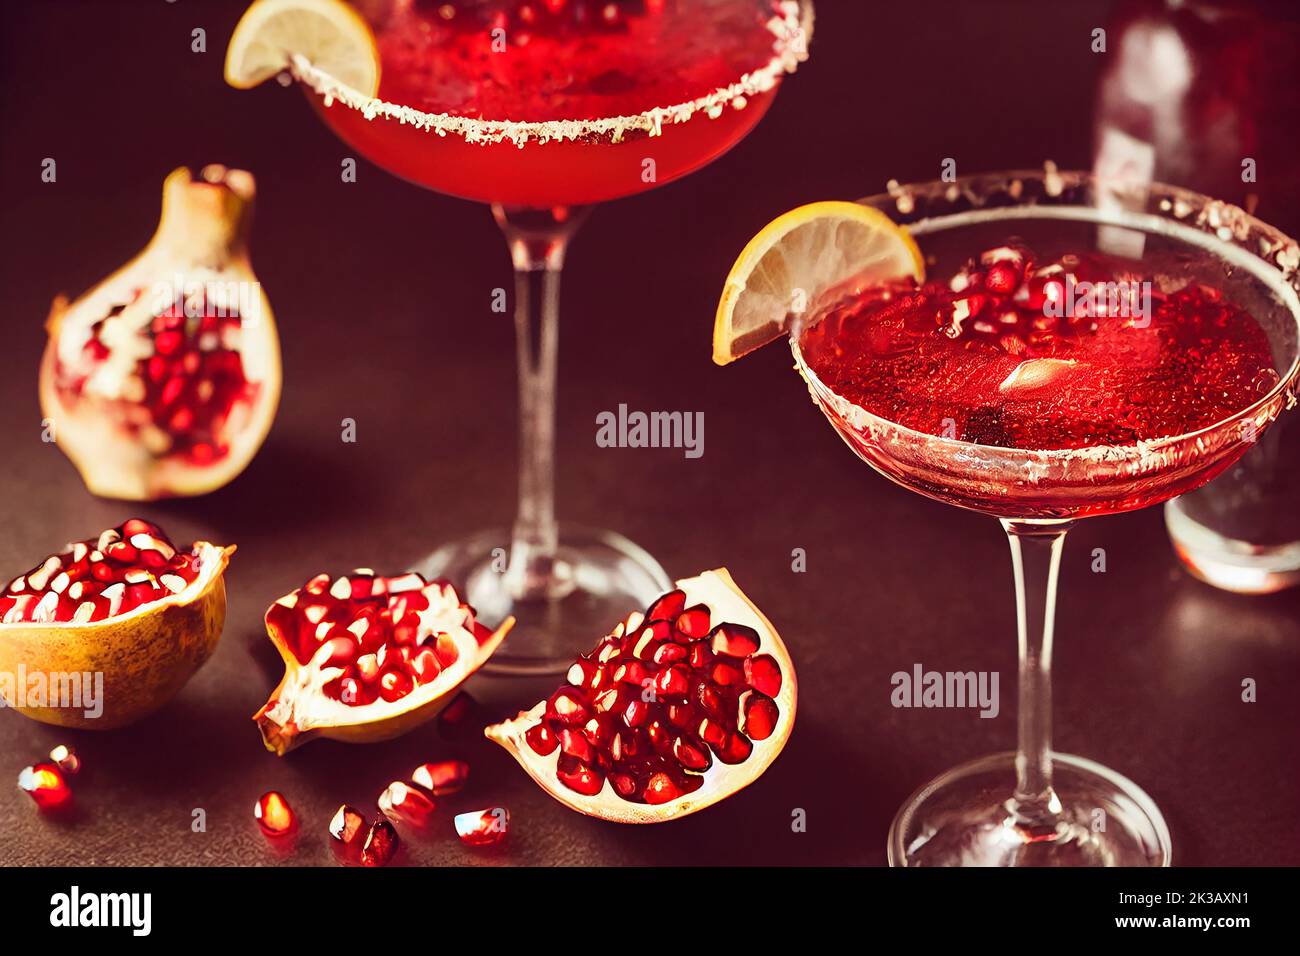 Beautiful pomegranate cocktail in flute martini glasses on dark background, festive party drink, contrast lighting, food photography and illustration Stock Photo